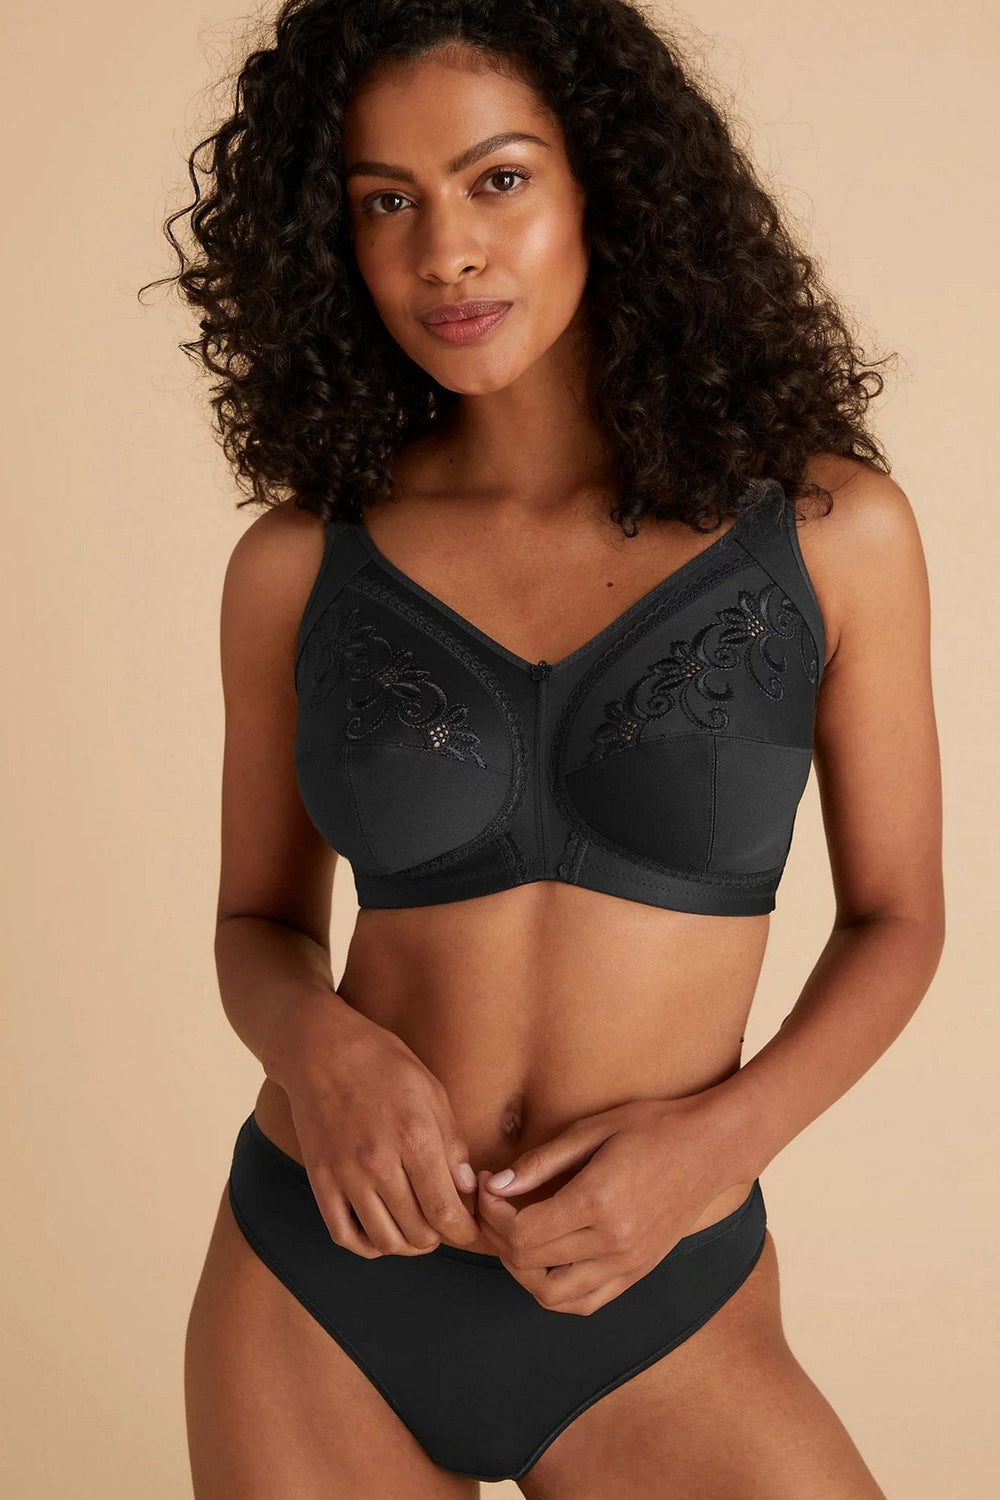 ENEM STORE - Online Shopping Mall Lingerie Section / M&S Collections TOTAL SUPPORT  NON-WIRED EMBROIDERED CROSSOVER FULL CUP BRA - BLACK – Enem Store - Online  Shopping Mall